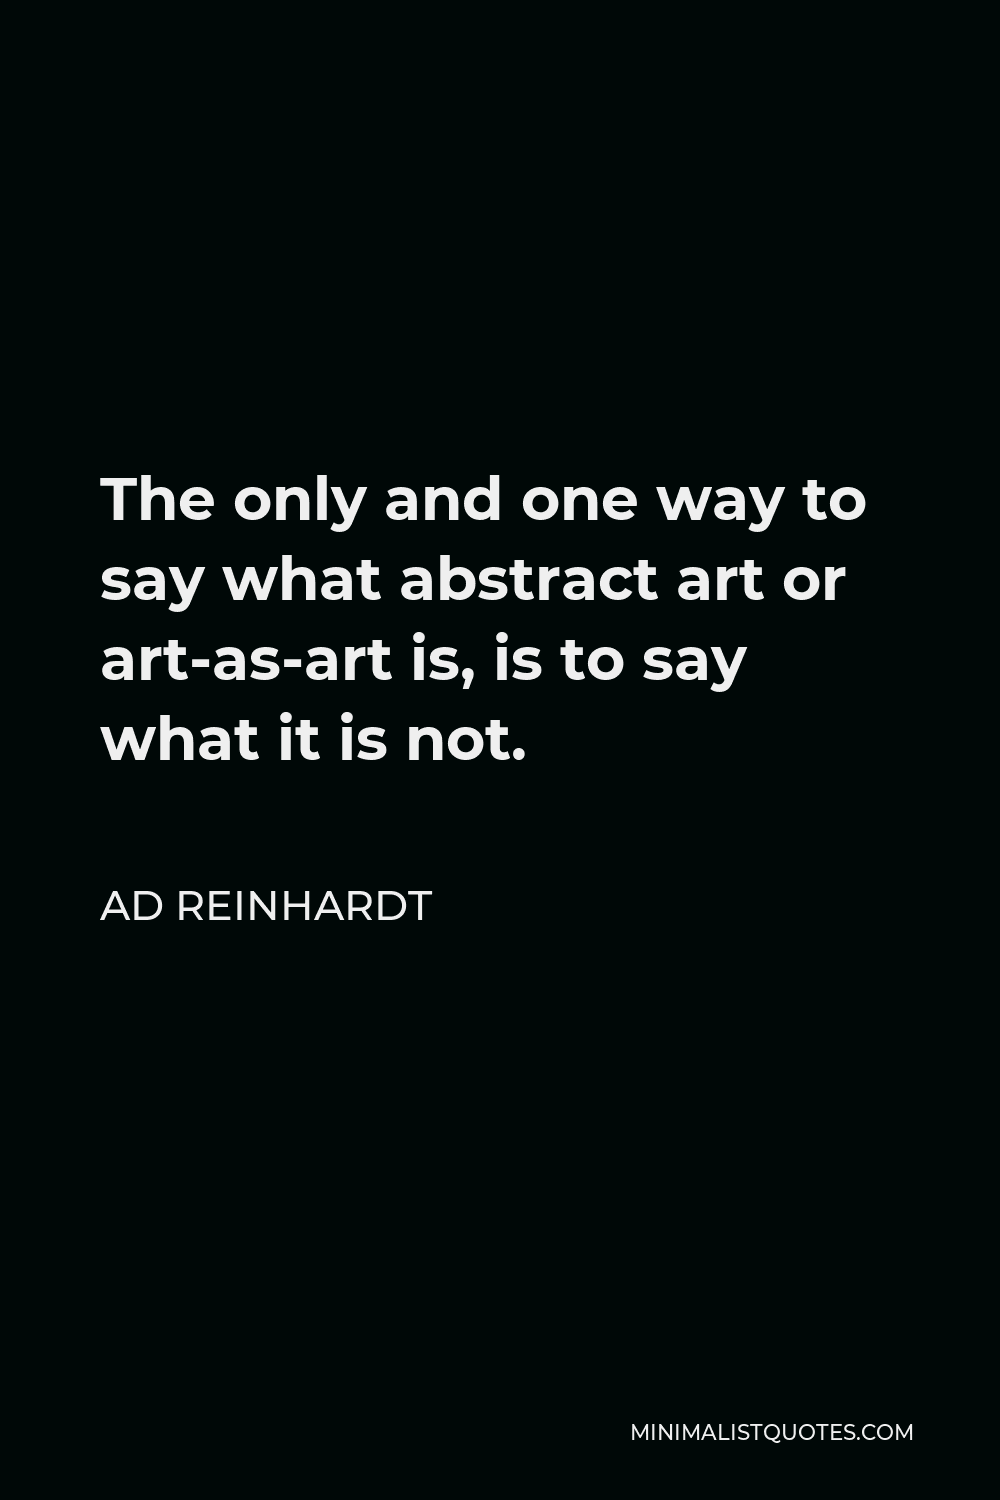 Ad Reinhardt Quote - The only and one way to say what abstract art or art-as-art is, is to say what it is not.